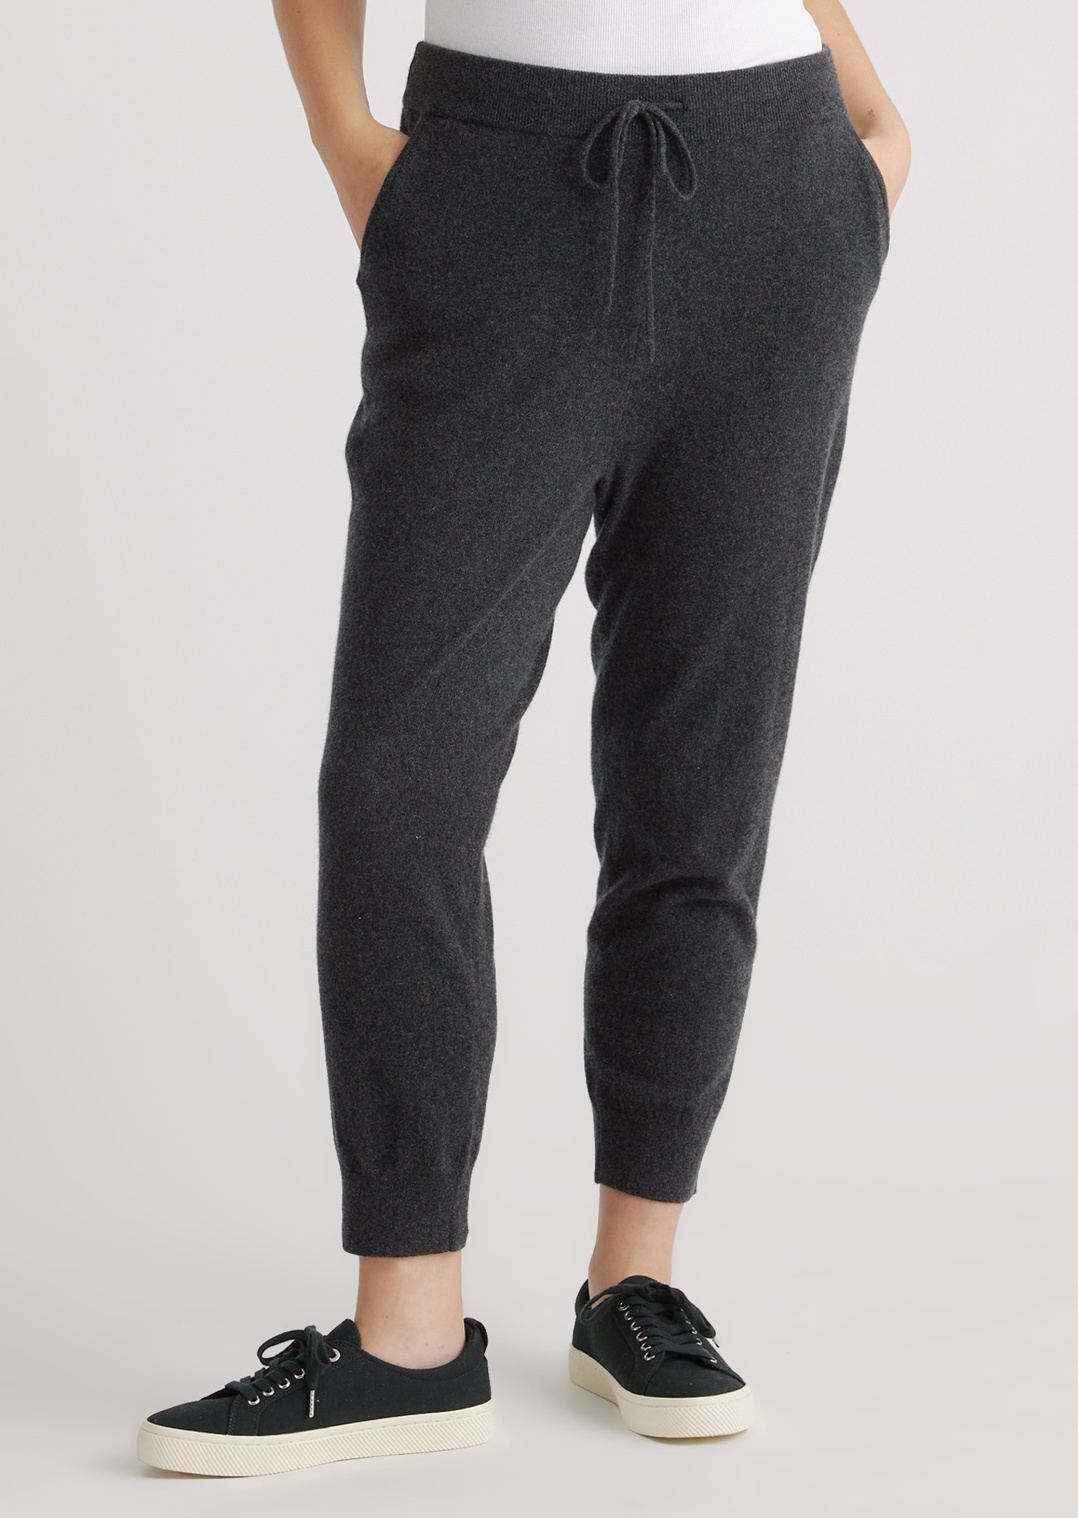 14 Best Joggers for Women: Cute and Versatile Picks!